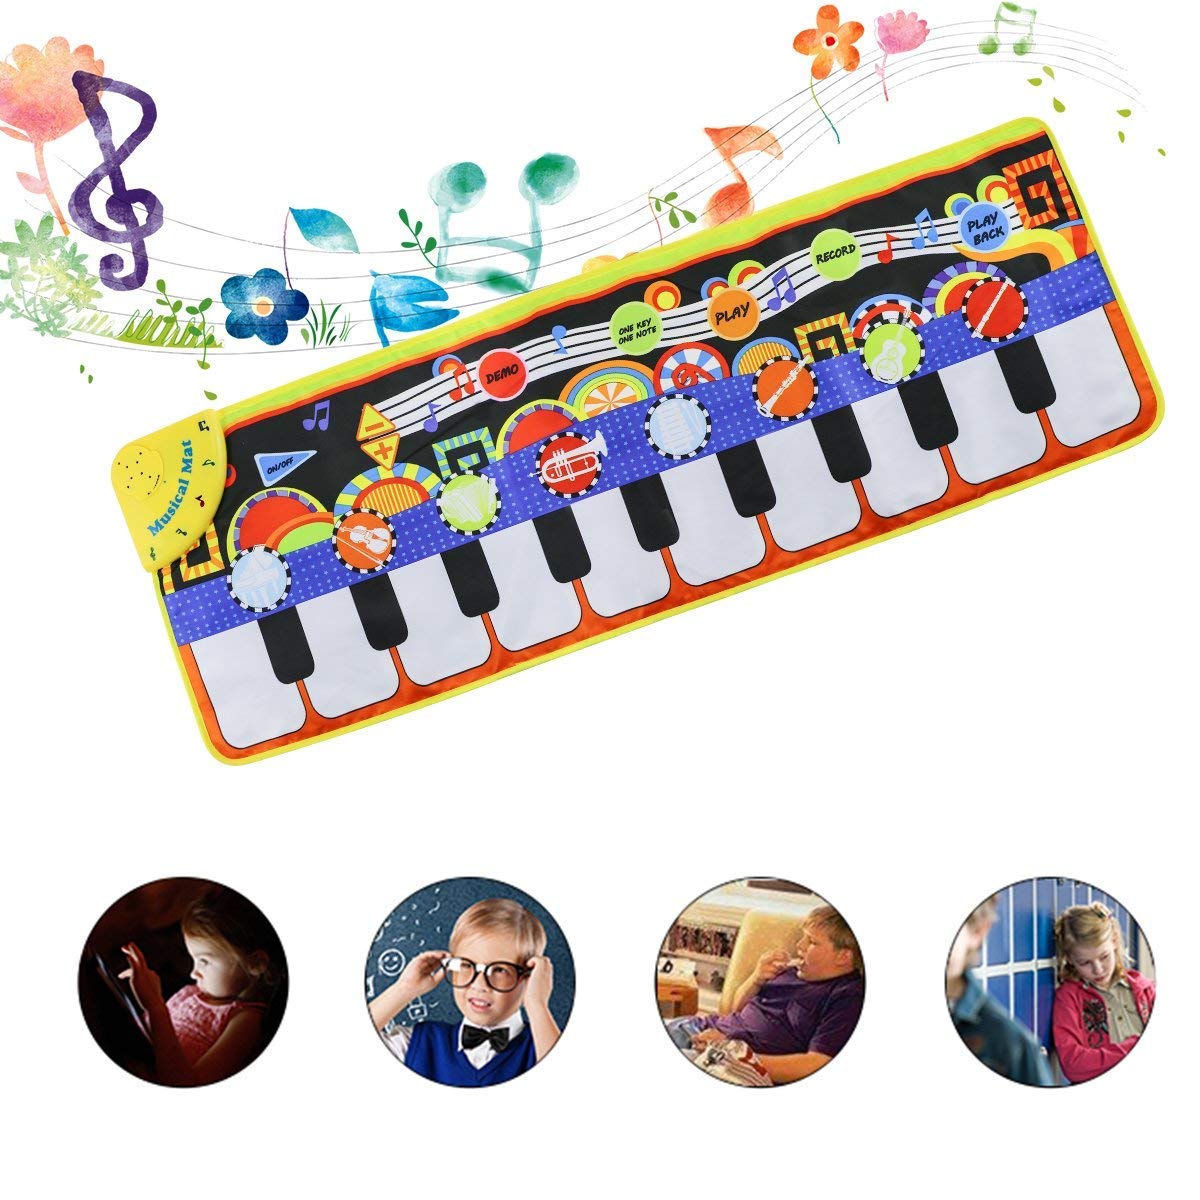 Cyiecw Piano Music Mat, Keyboard Play Mat Music Dance Mat with 19 Keys Piano Mat, 8 Selectable Musical Instruments Build-in Speaker & Recording Function for Kids Girls Boys, 43.3'' x14.2''